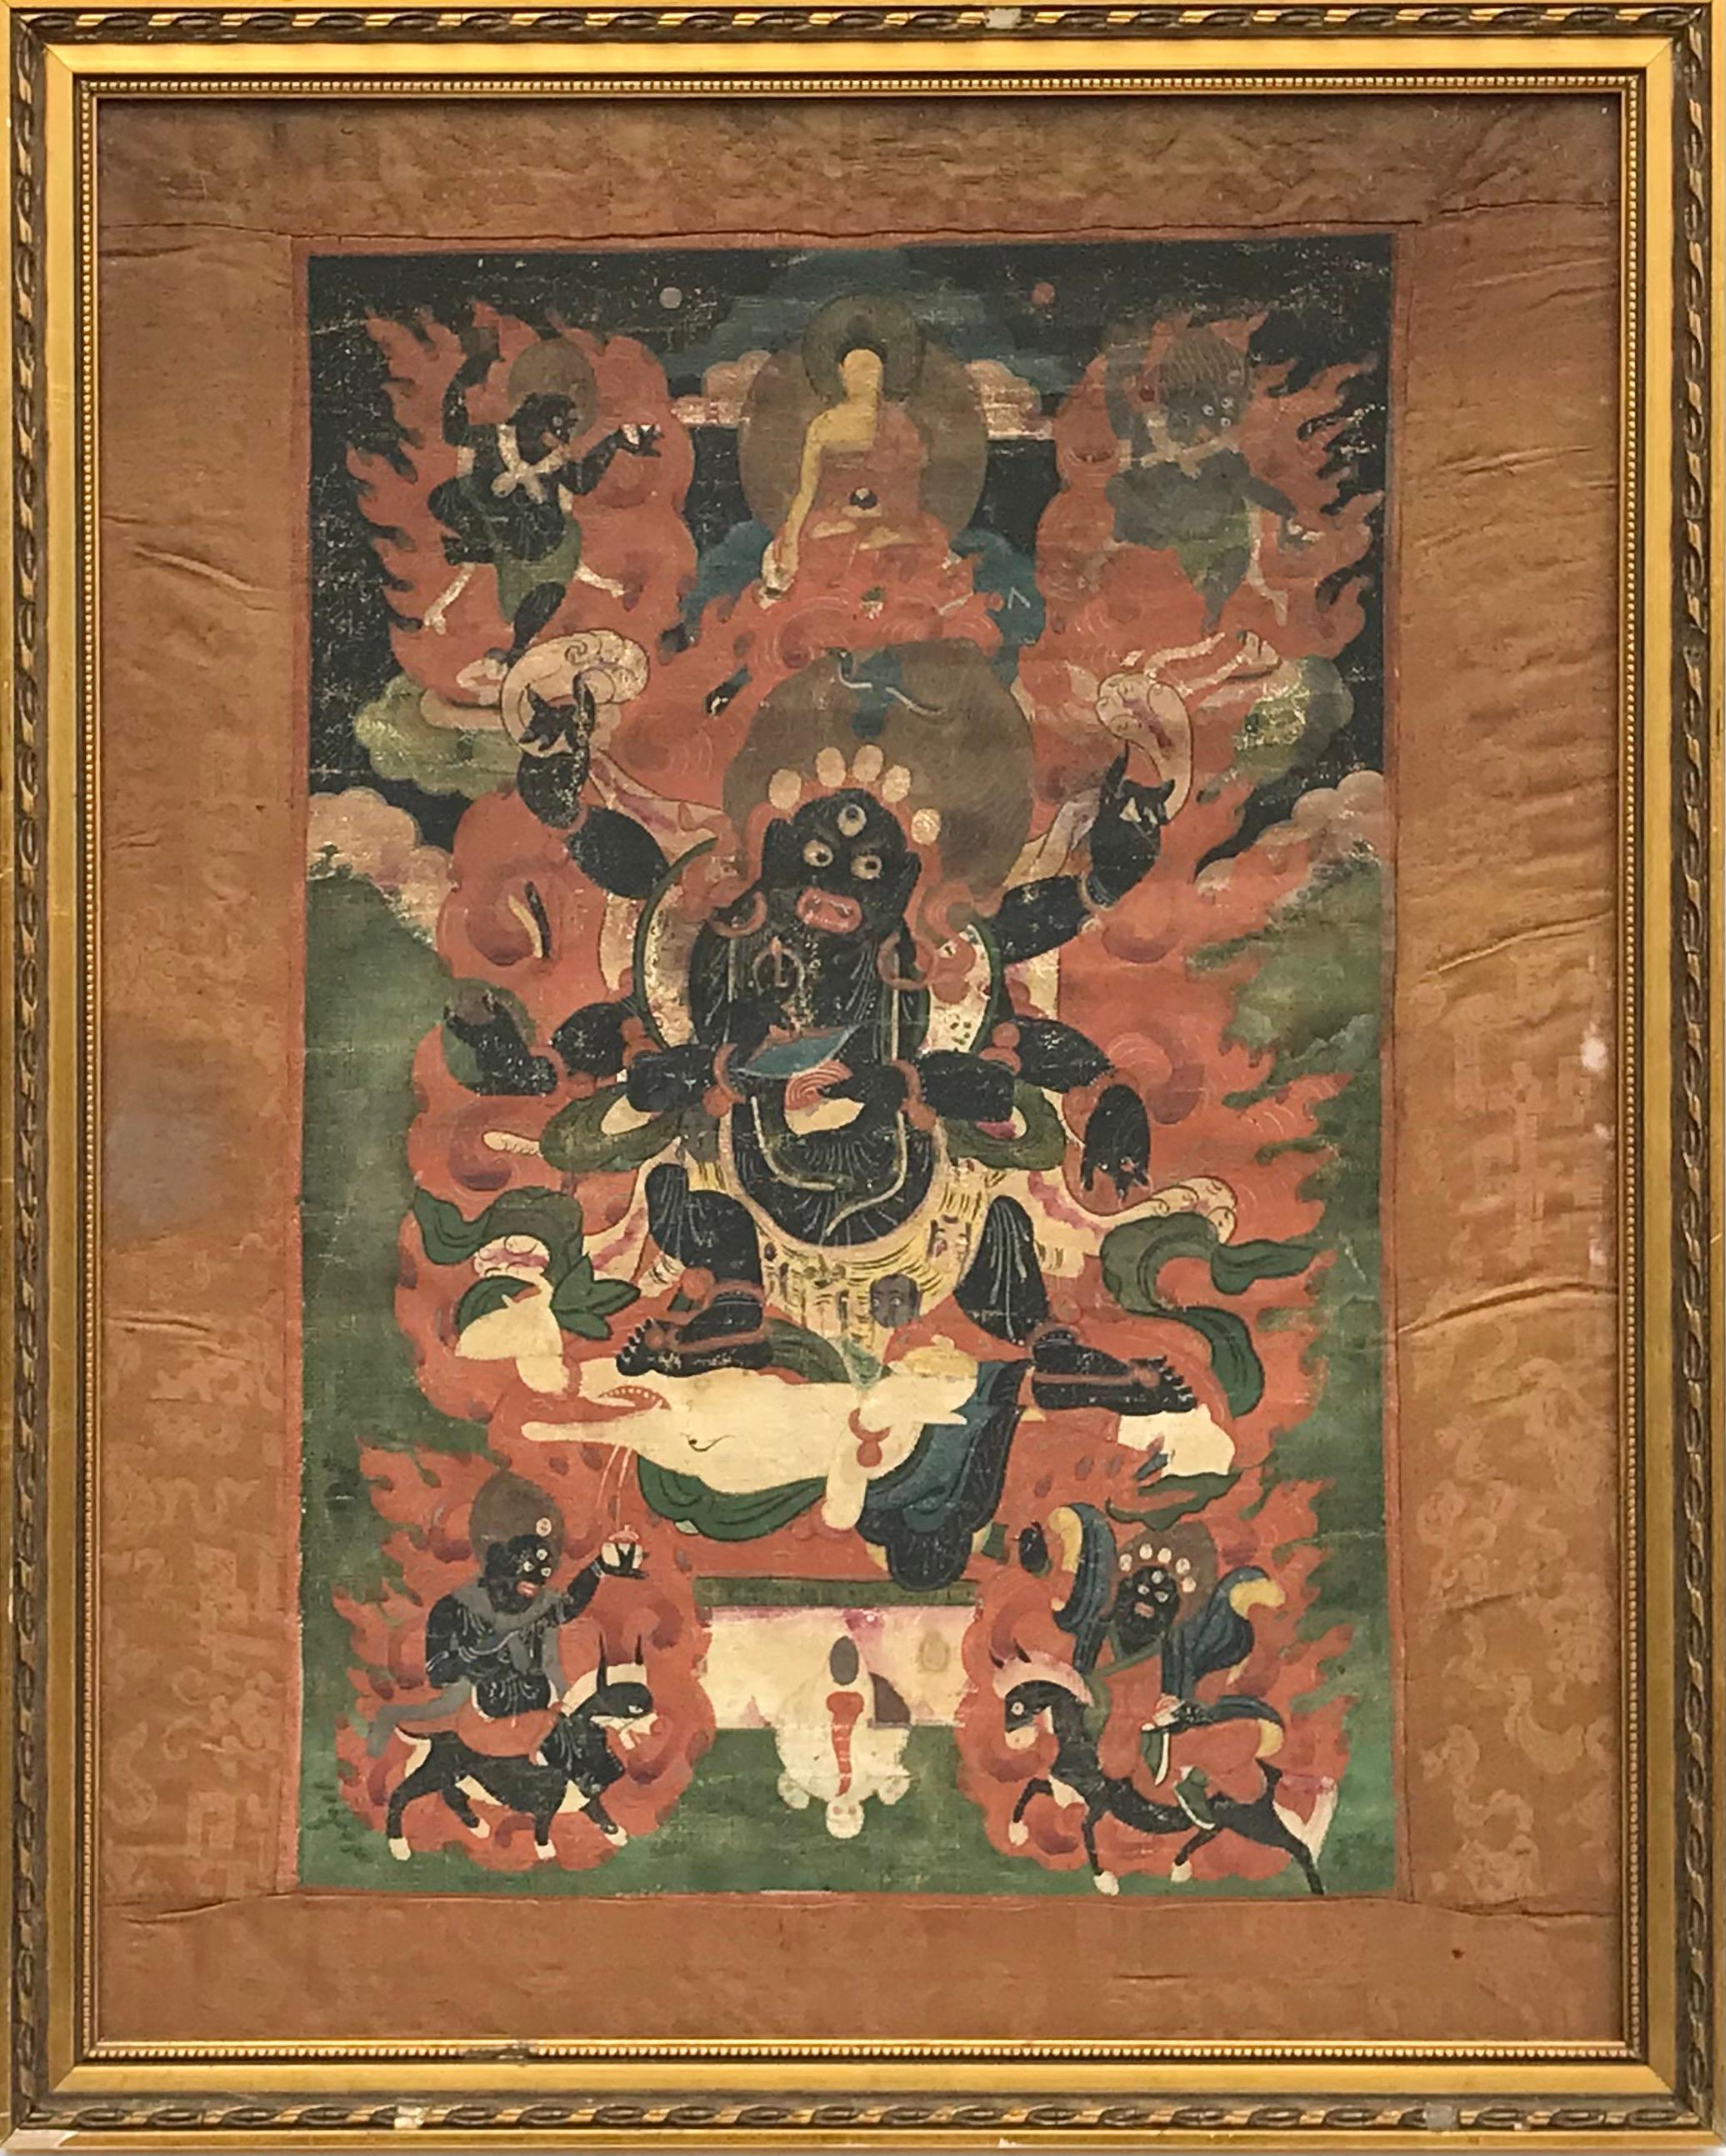 Tibetan Buddhist thangka from the late 18th early 19th century.
Distemper on cloth (either silk or cotton)
 
Depicting a Buddhist deity with multi arms and Buddhist religious relics in hand standing on either a naked human body or animal with flames